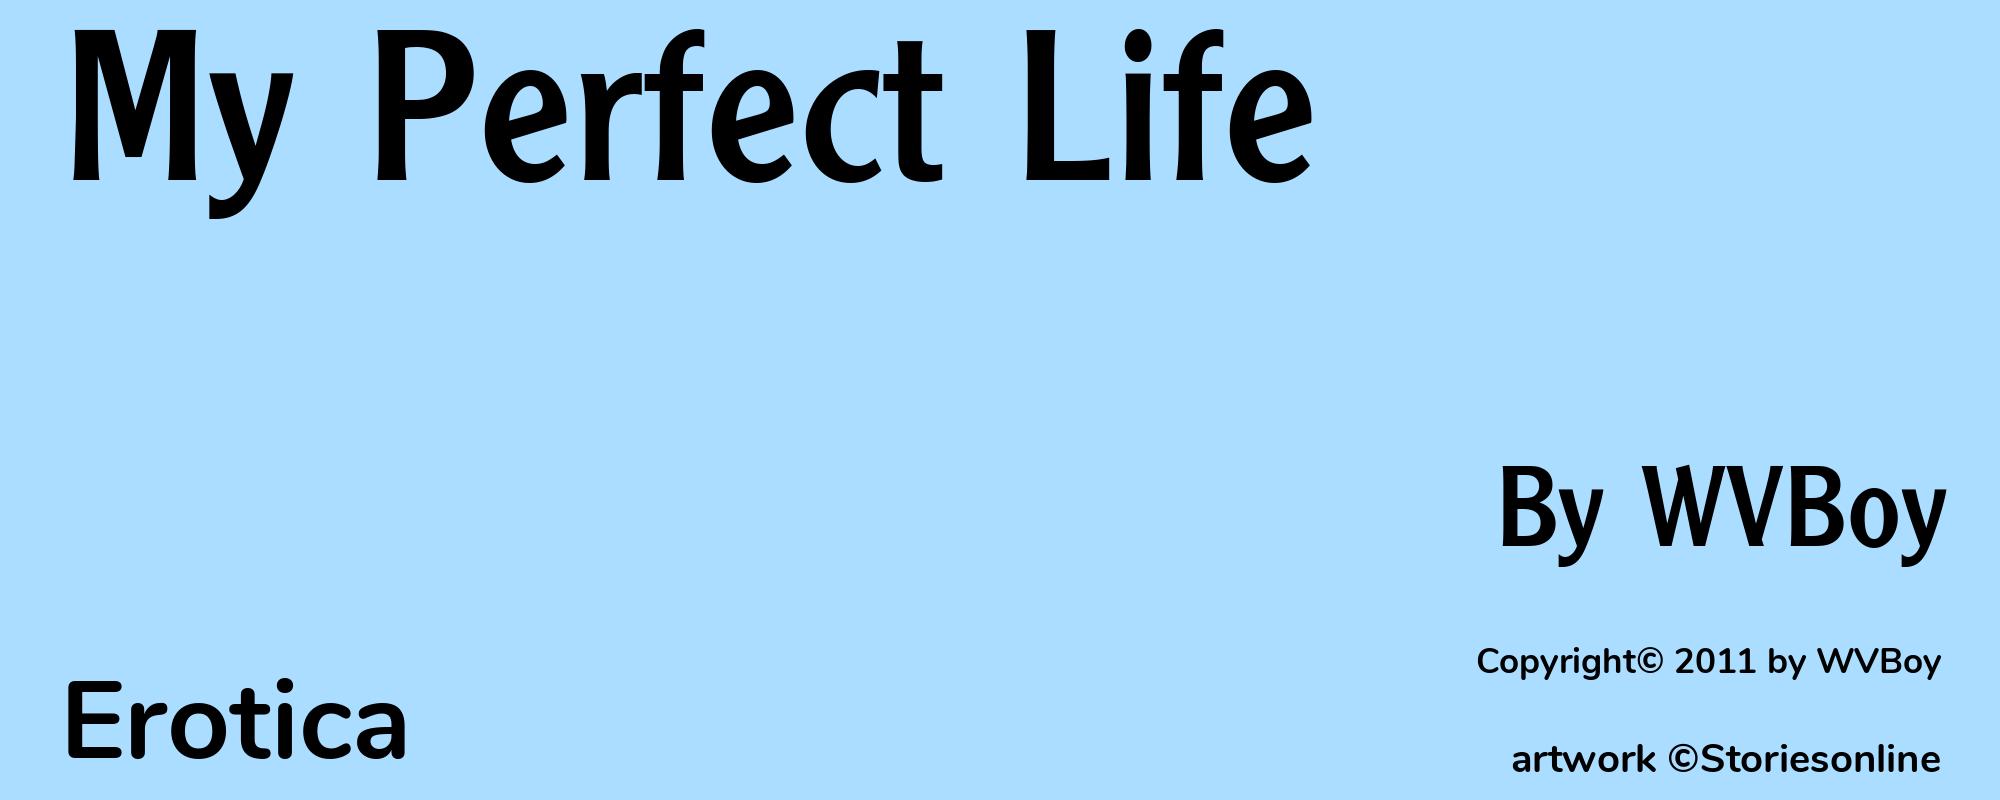 My Perfect Life - Cover